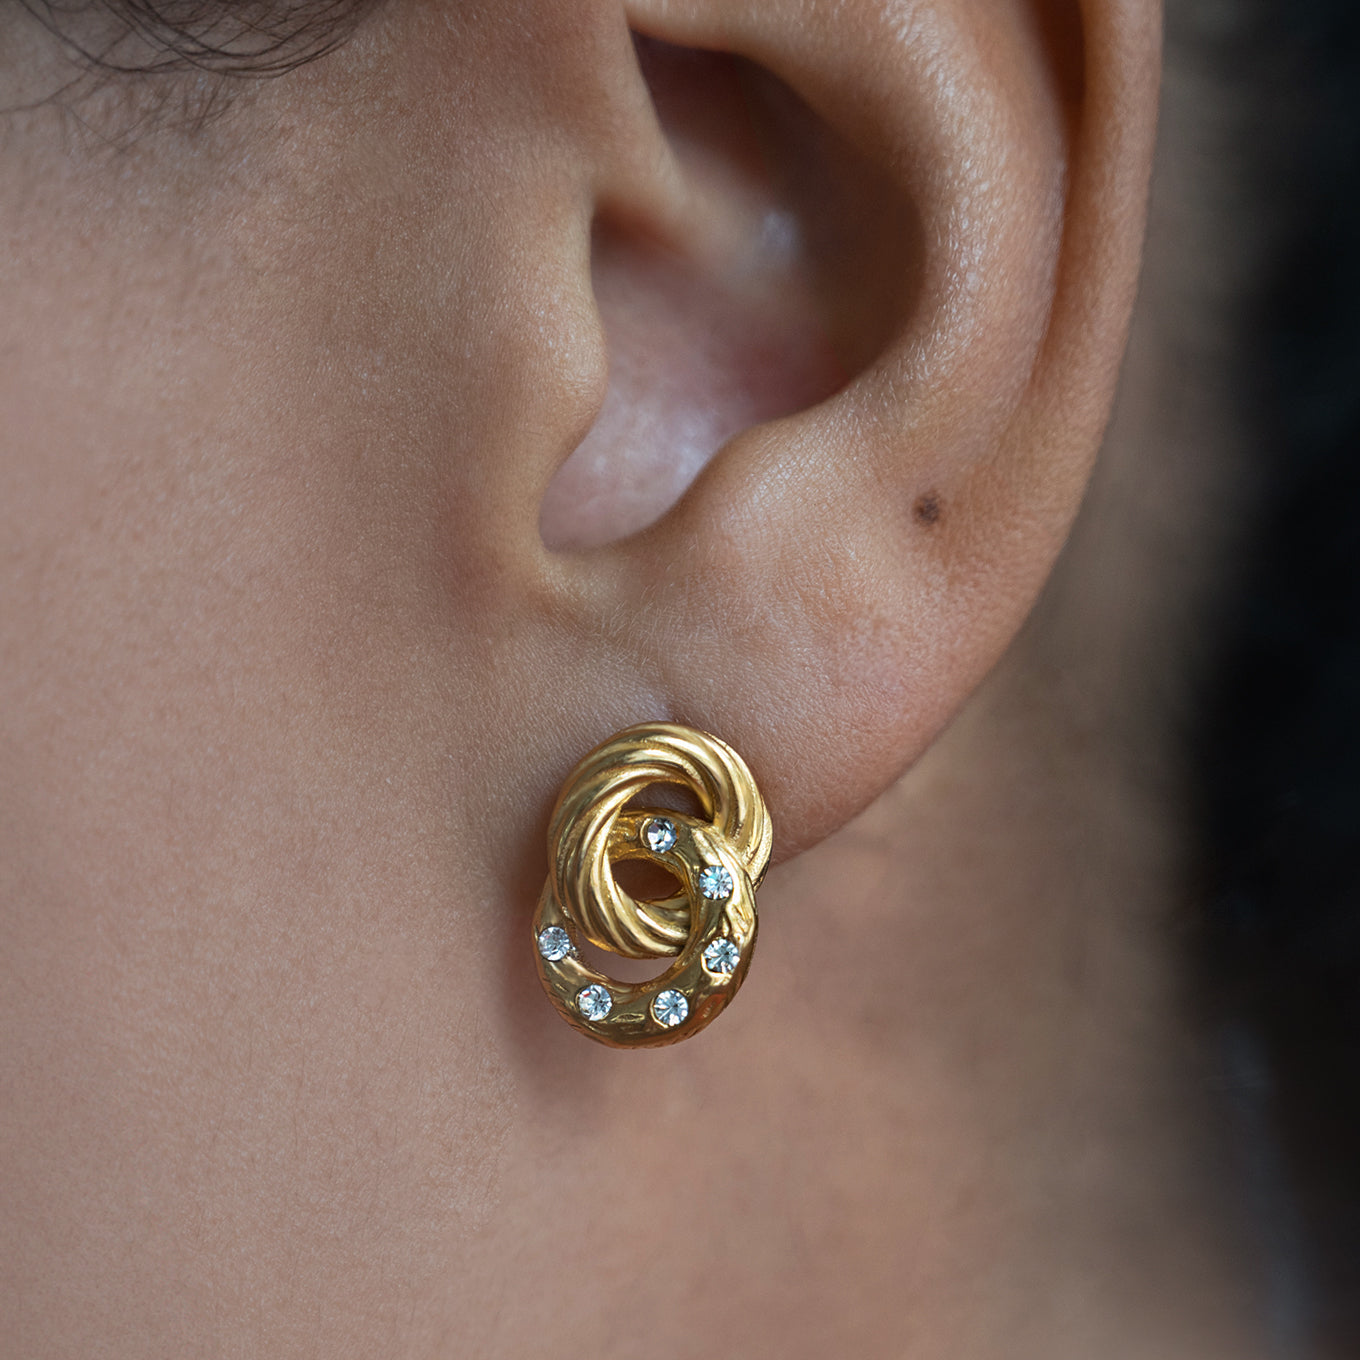 Linked Circles Diamante Stud Earrings Non Tarnish shown worn in a model's ear